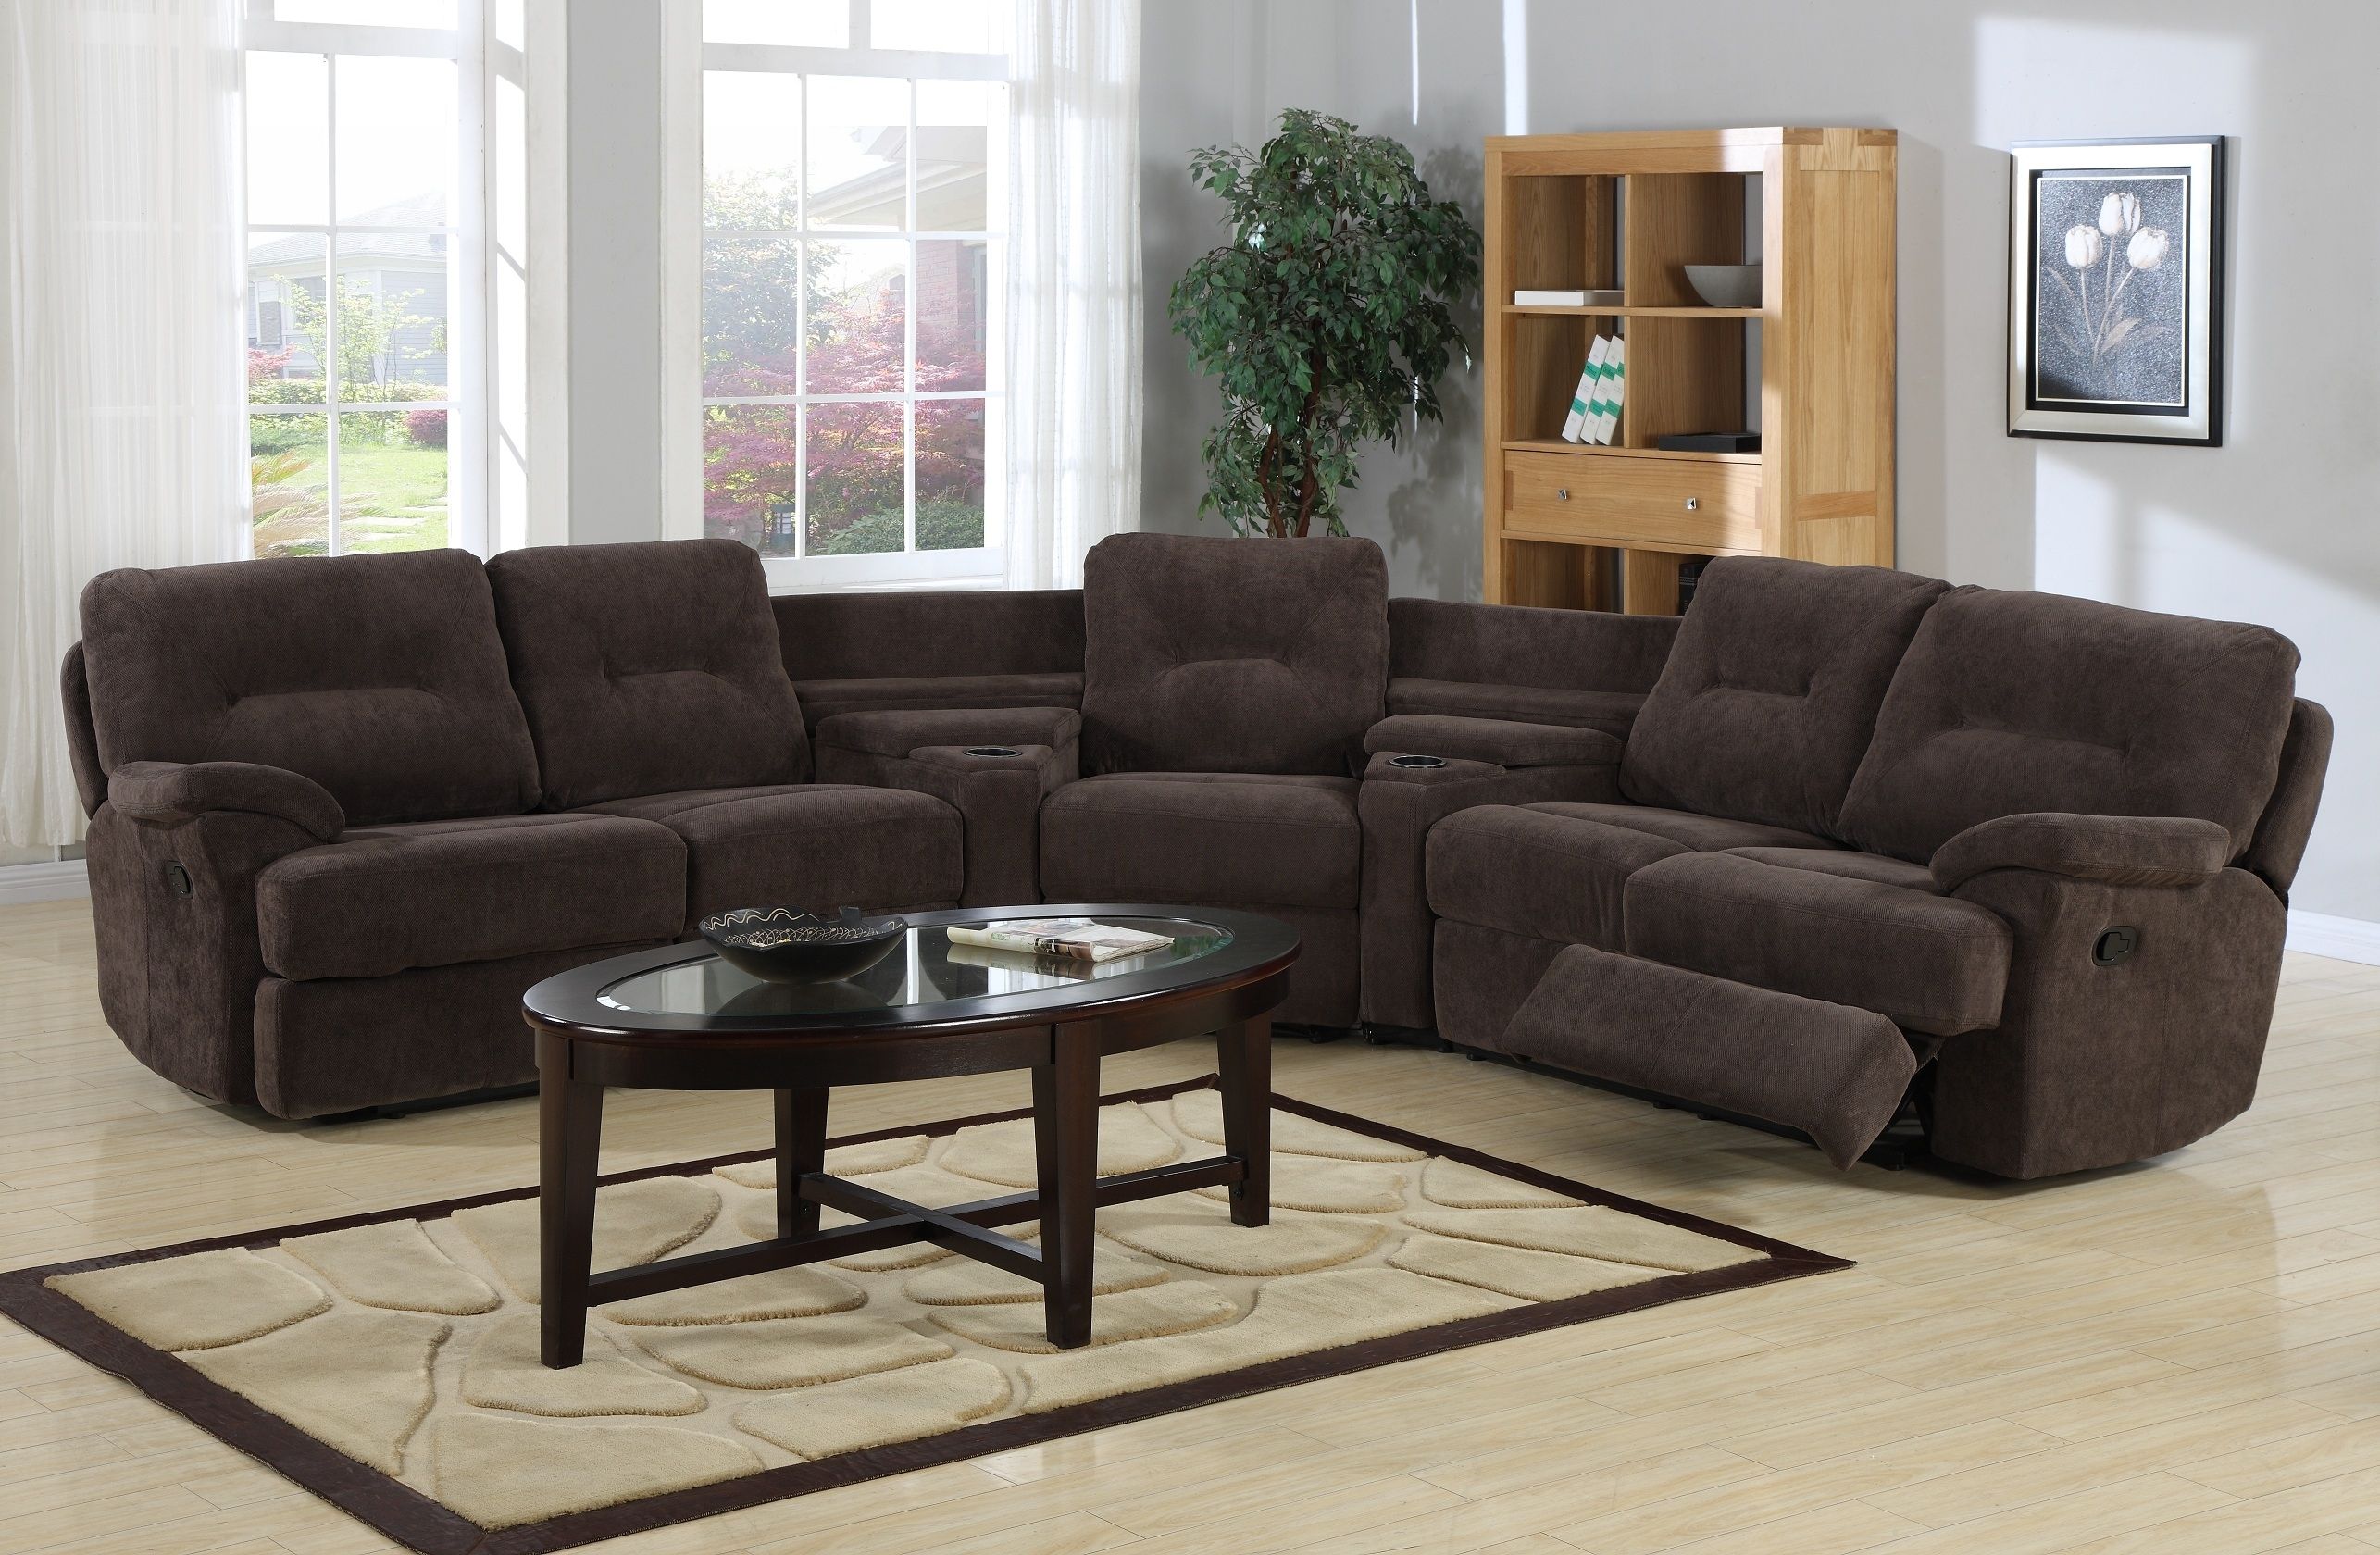 10 Collection of Portland Sectional Sofas